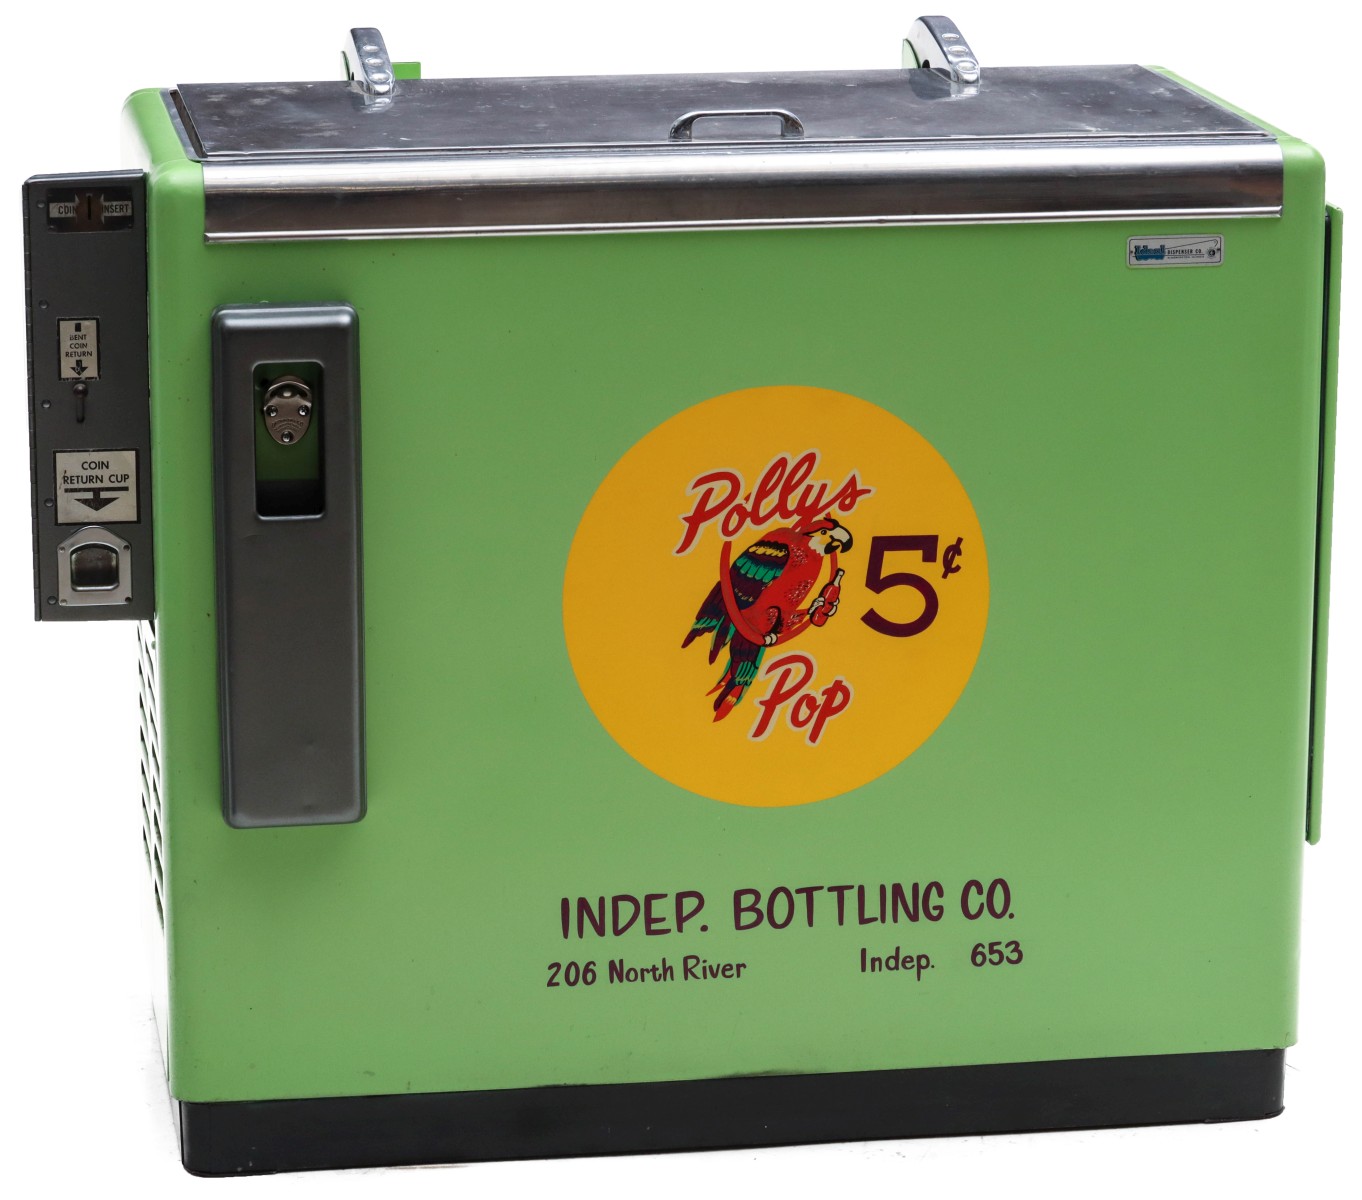 AN ORIGINAL RESTORED COIN OPERATED POLLY'S POP COOLER